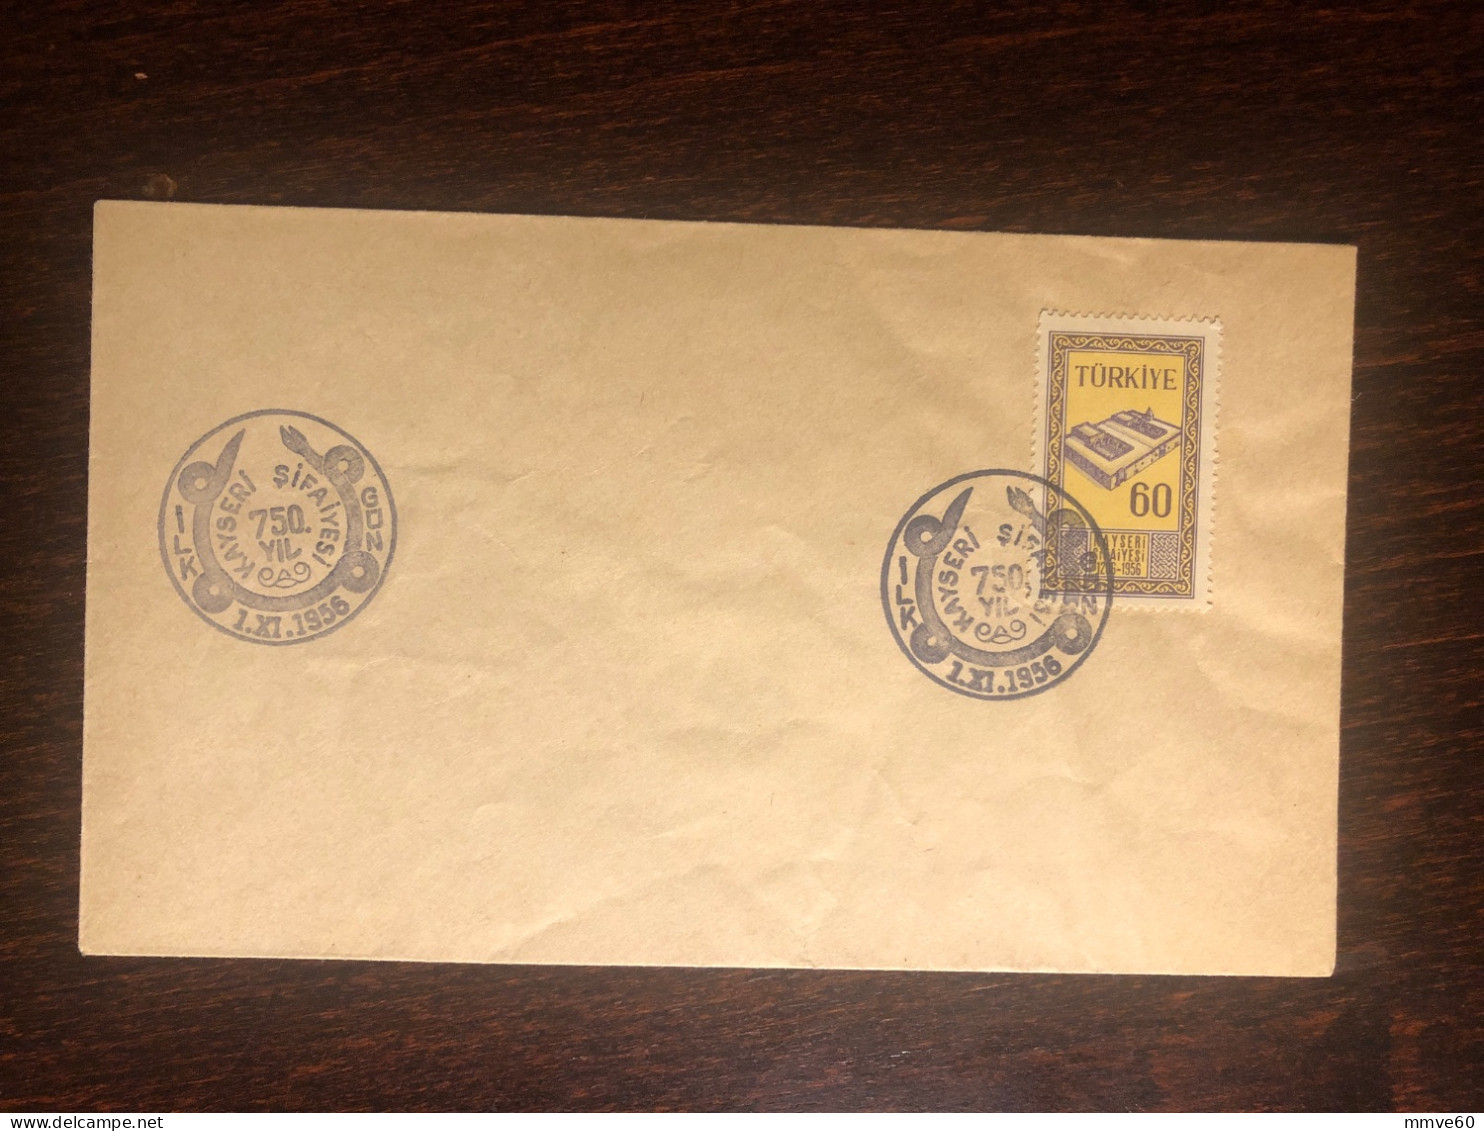 TURKEY FDC COVER 1956 YEAR MEDICAL SCHOOL HEALTH MEDICINE STAMPS - FDC